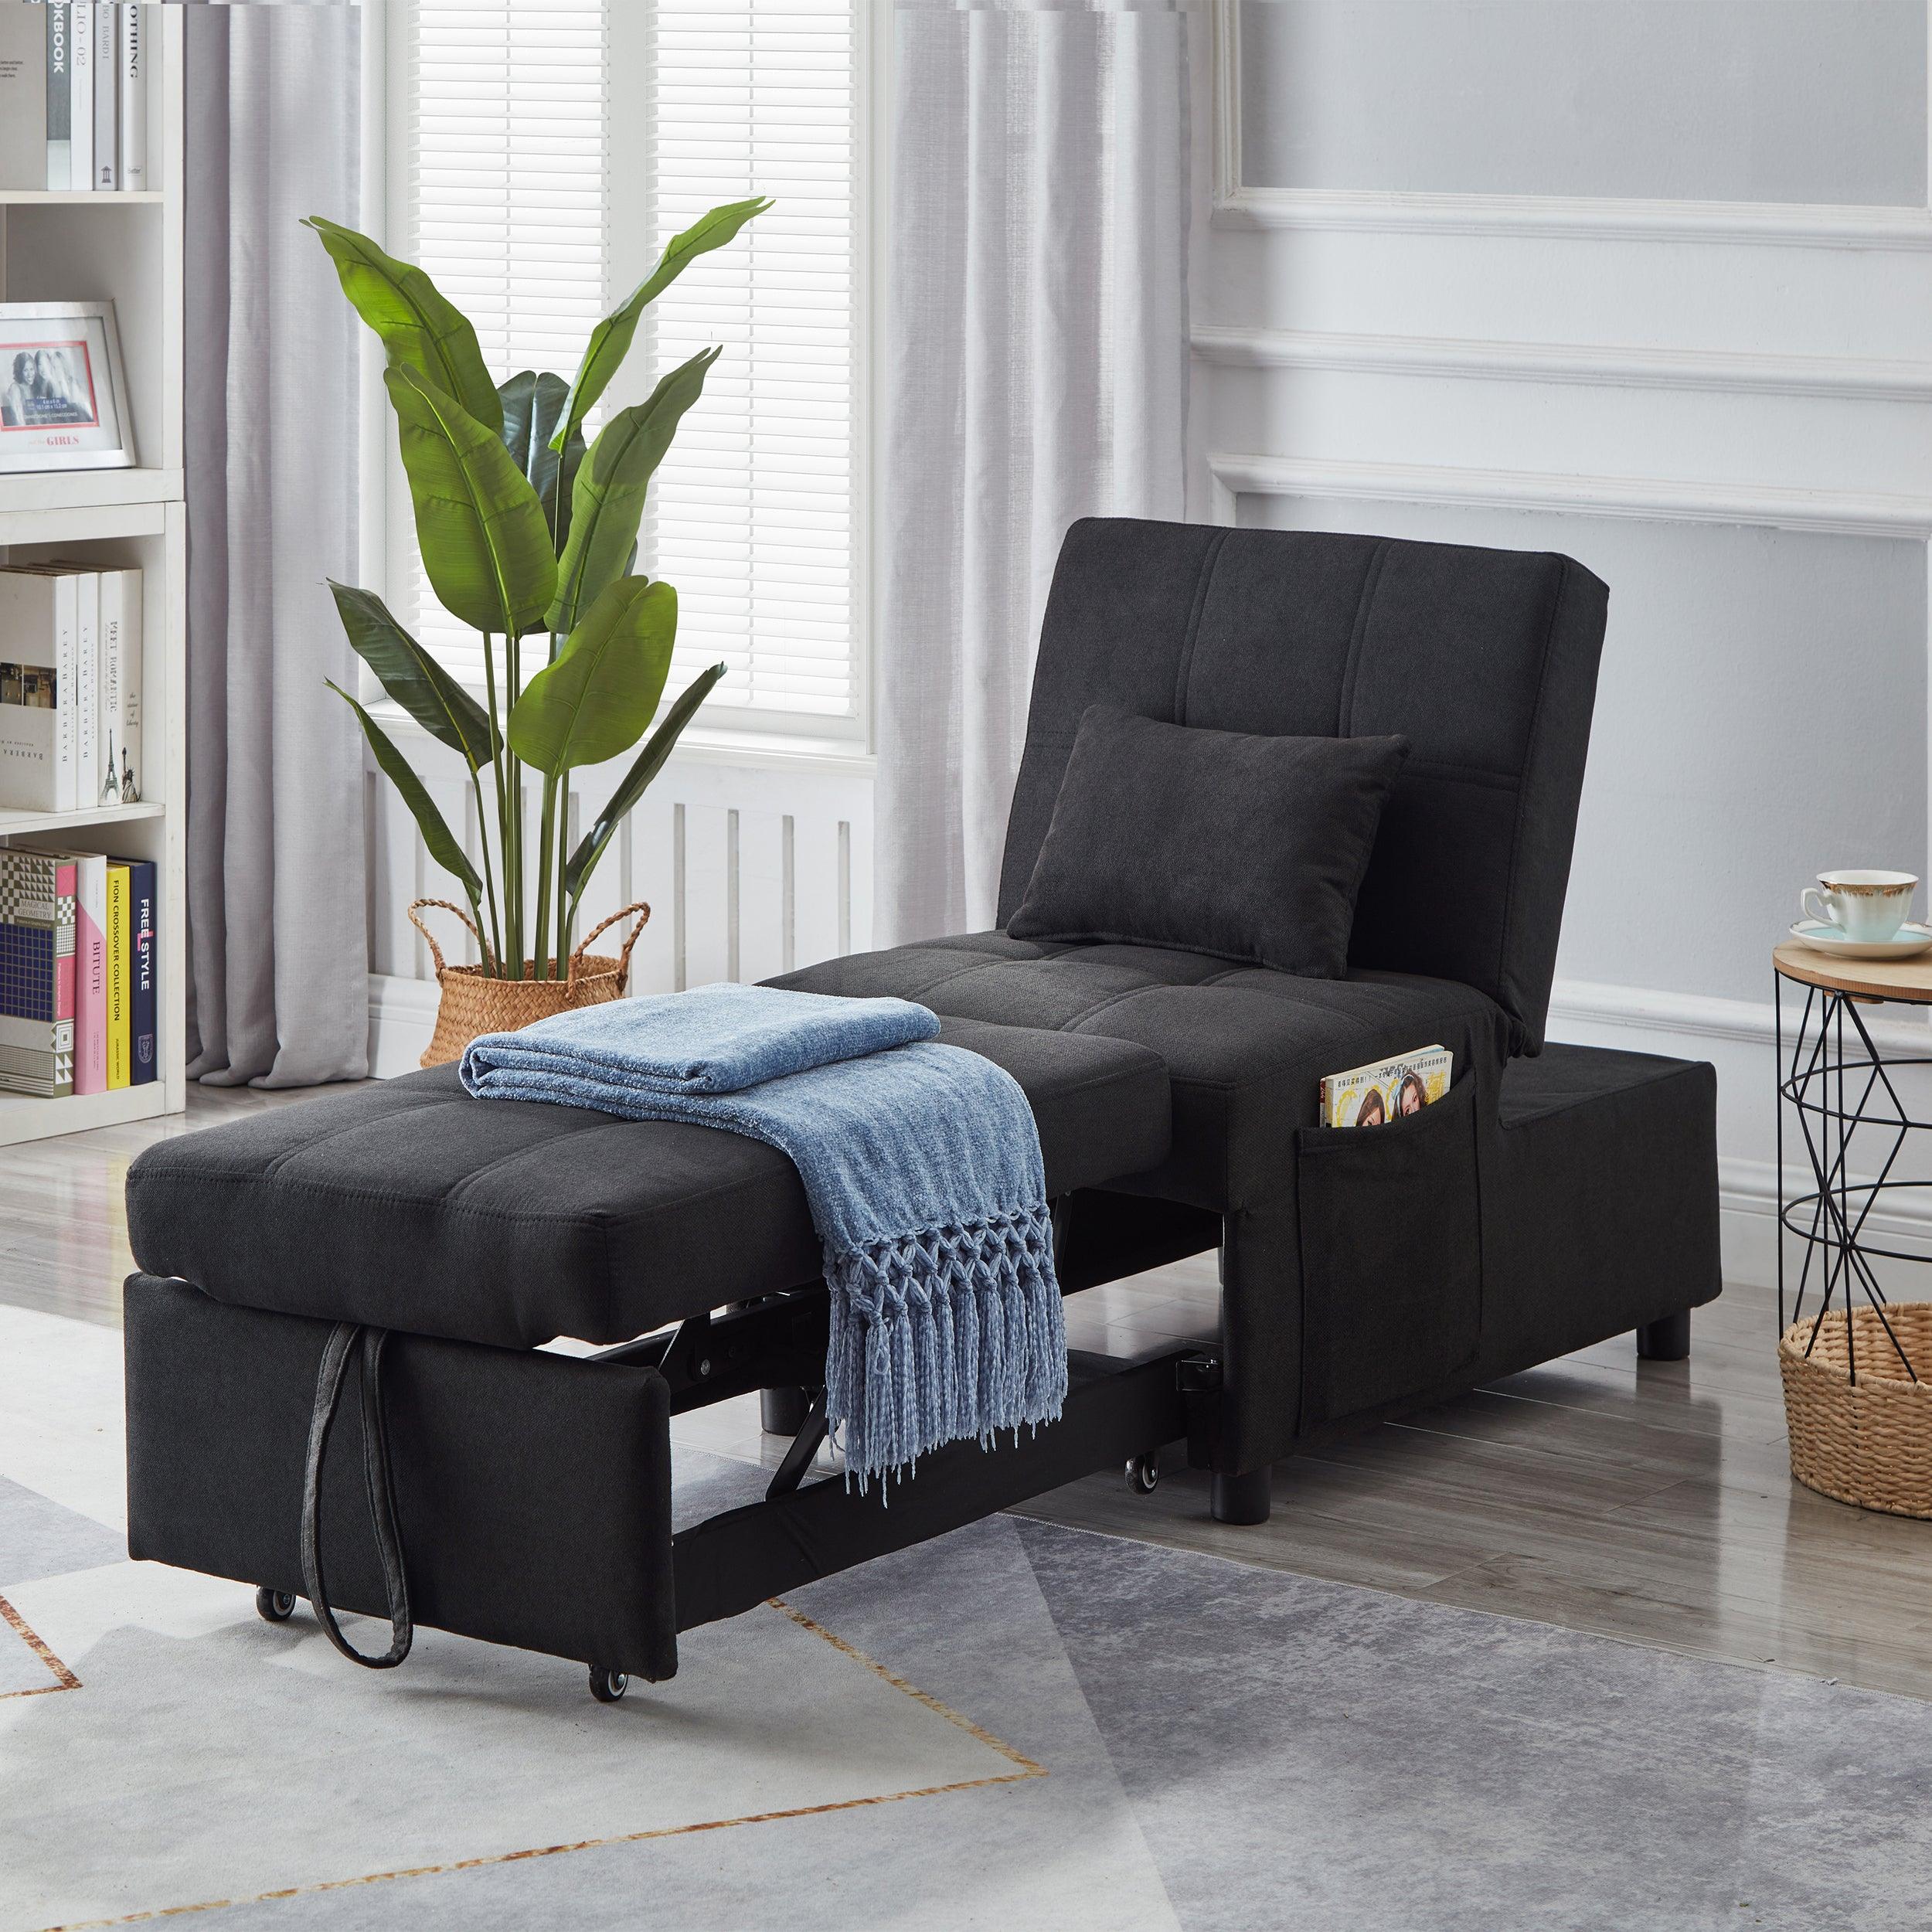 🆓🚛 Noxin 3-in-1 Convertible Bed Lounge, Chair & Ottoman - Black